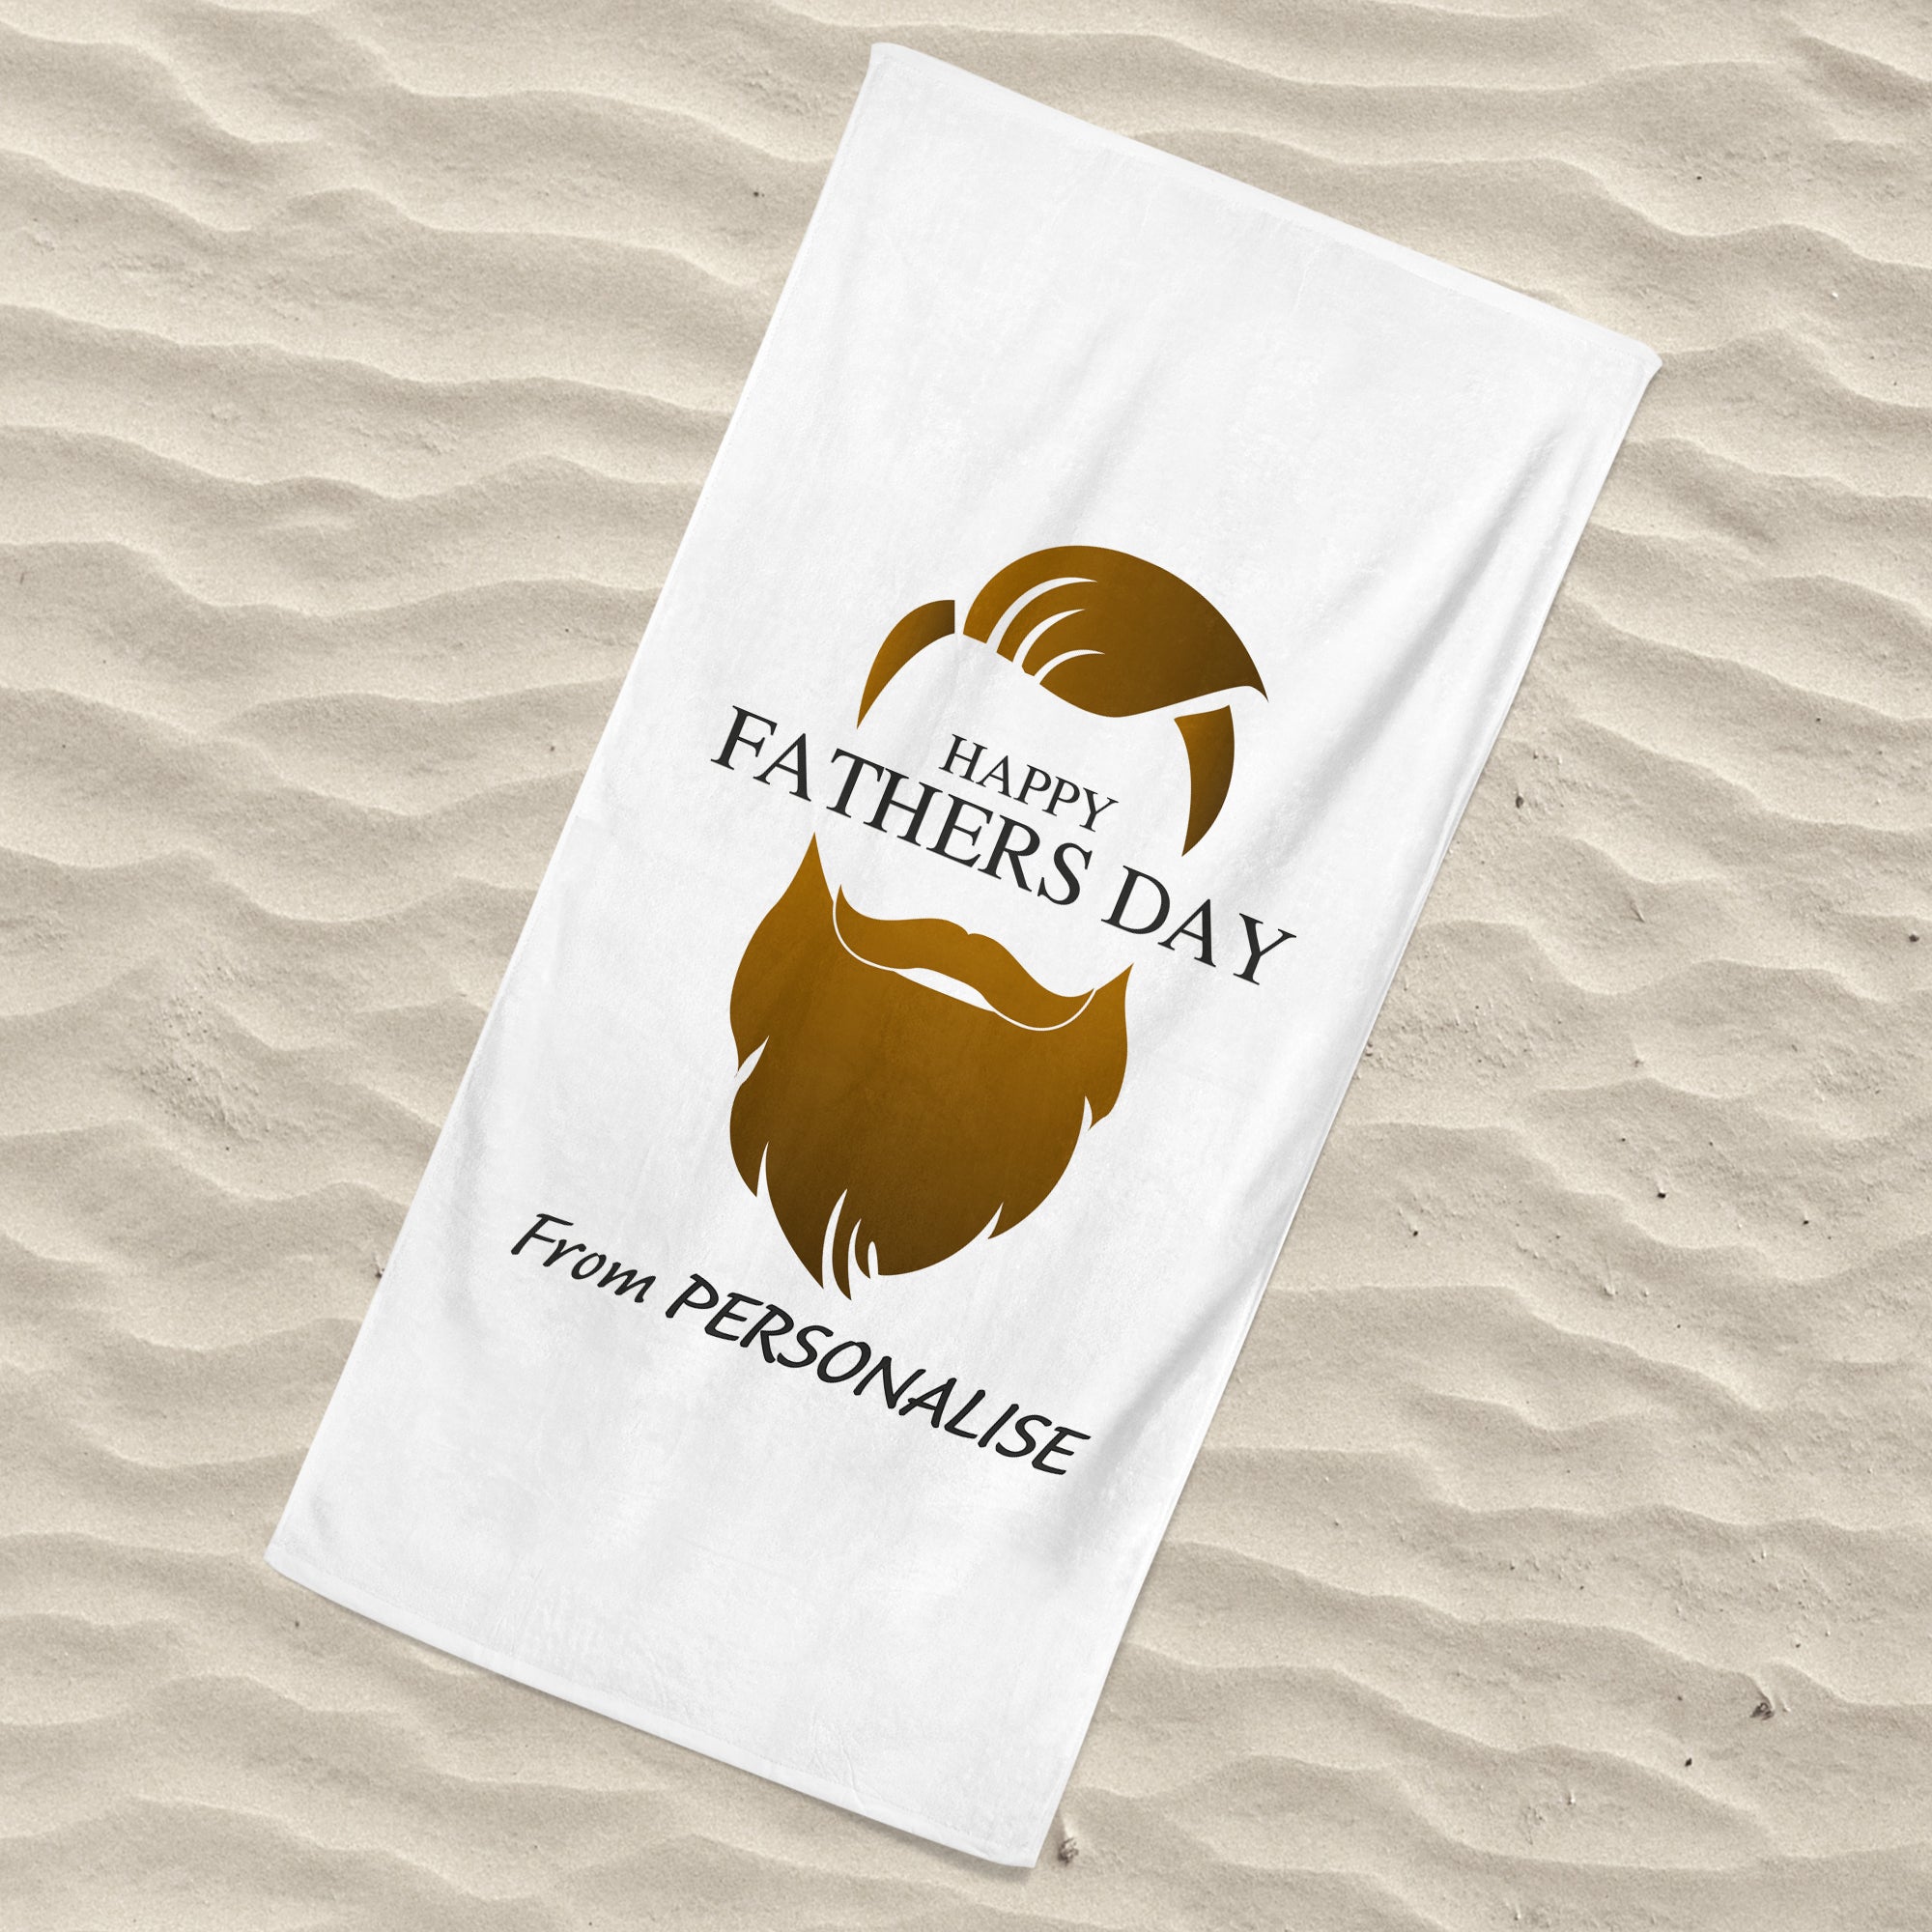 Beach Towel White with Beard - Happy Fathers Day - Personalise with Name